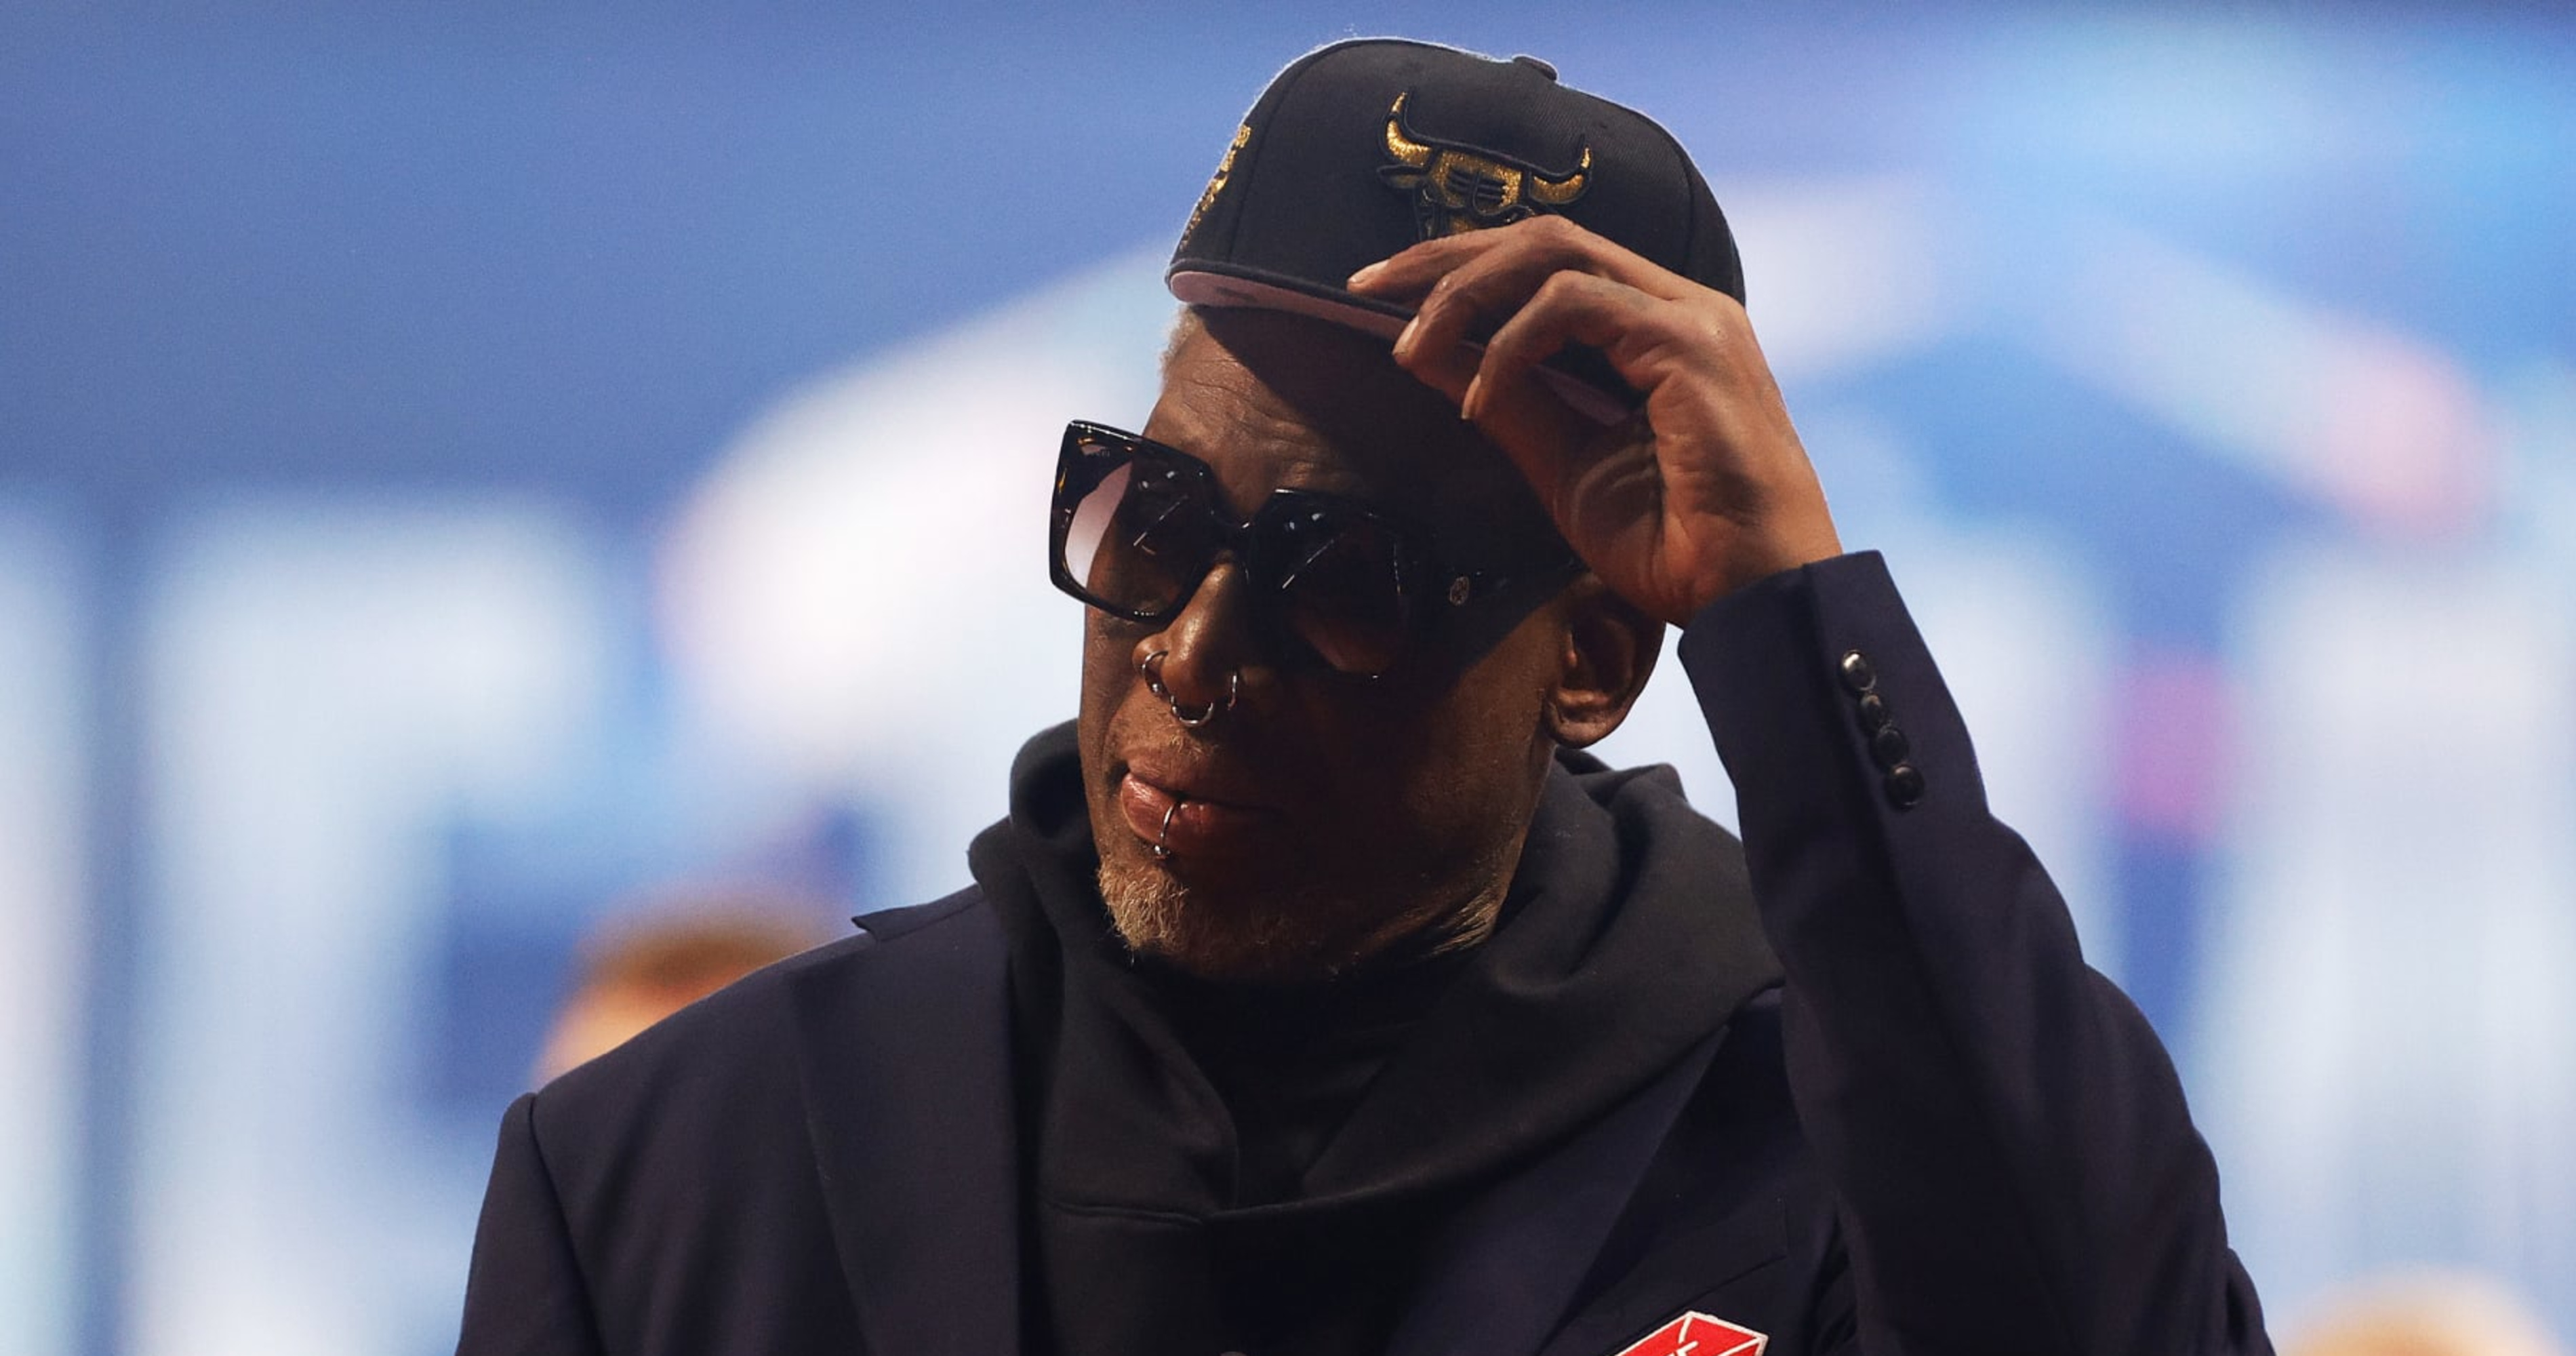 Dennis Rodman to Go to Russia to Help Brittney Griner: 'I Know Putin Too Well'